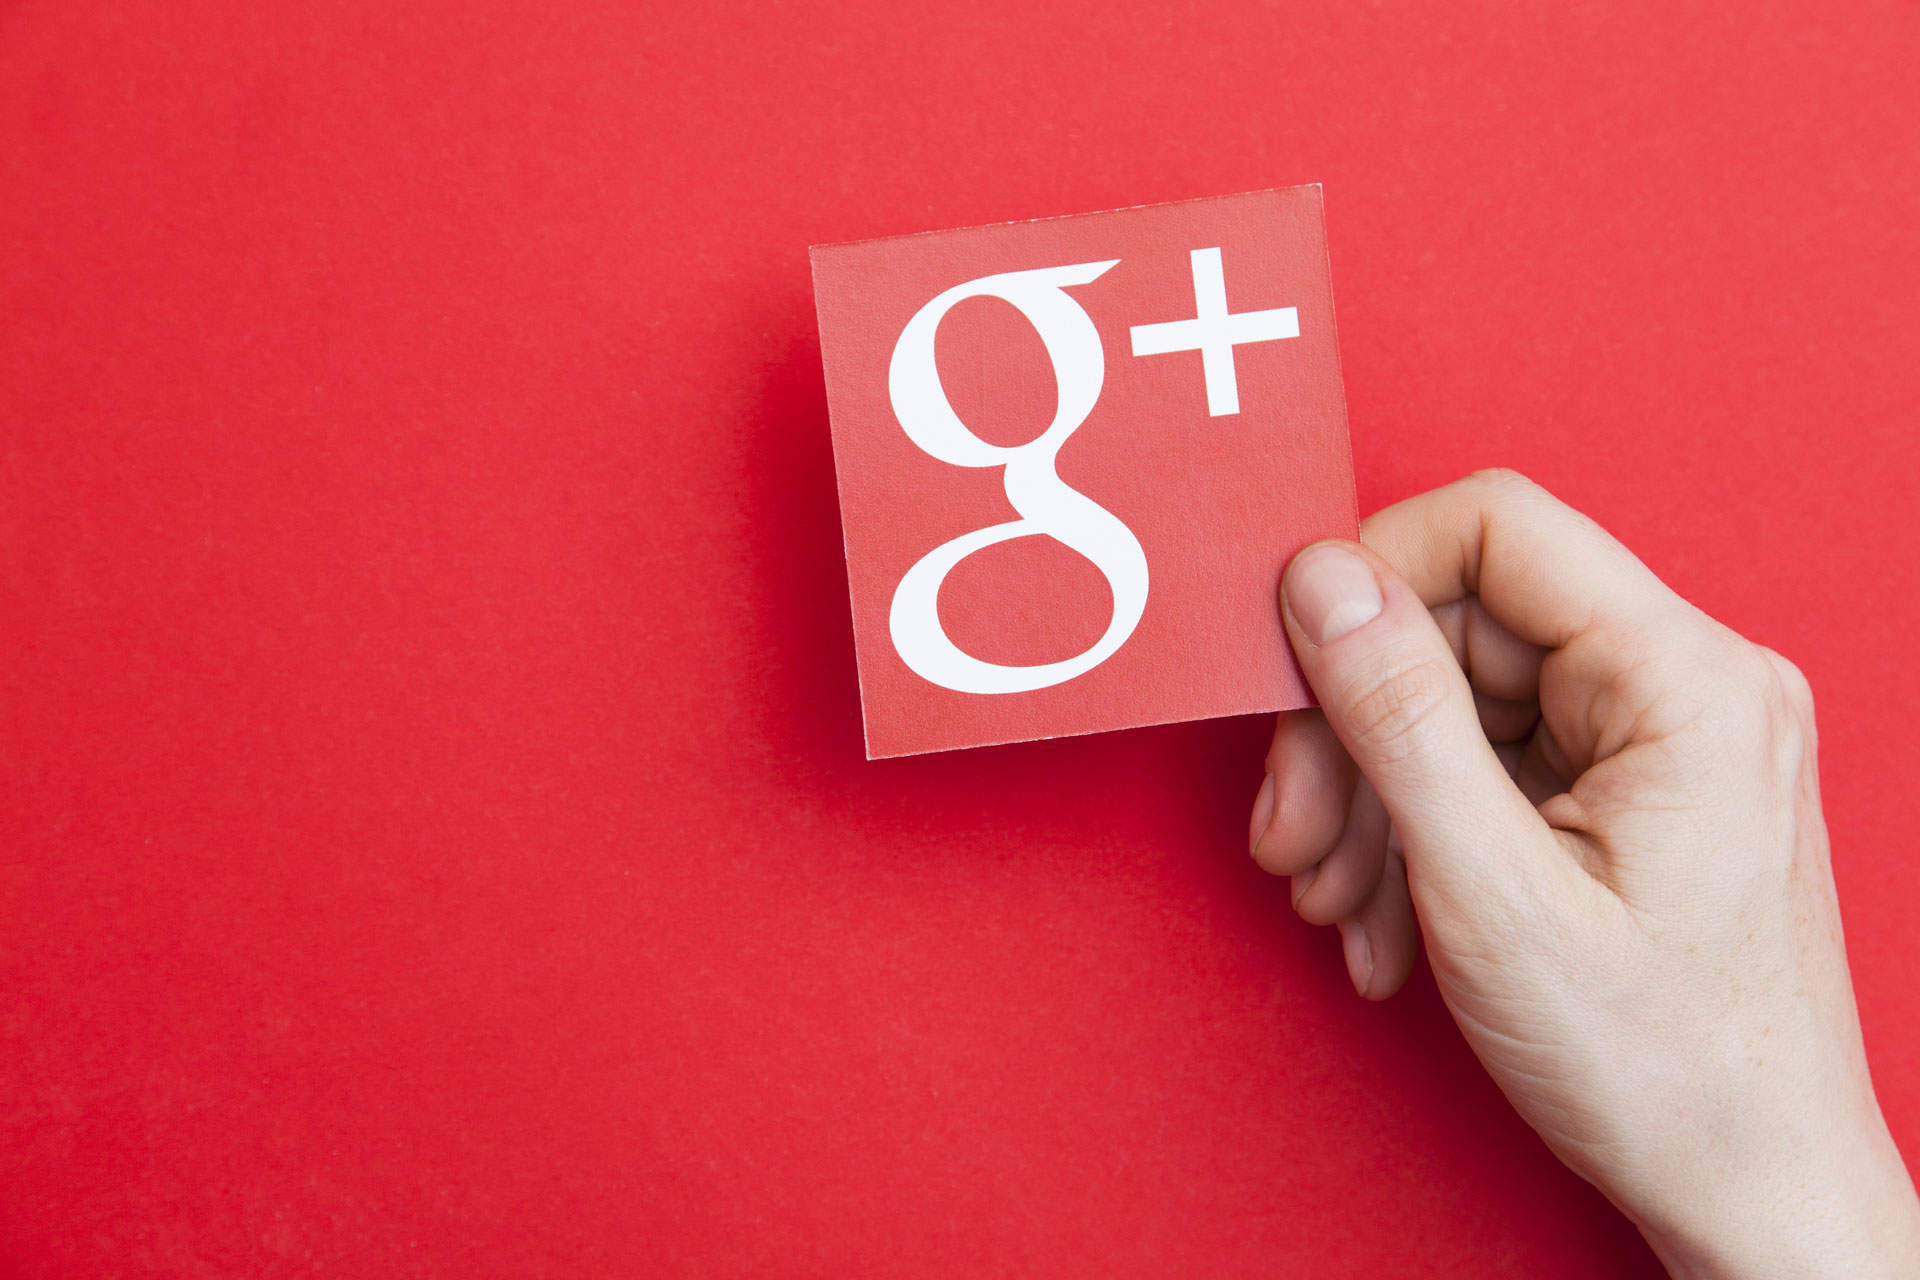 Google Plus shutting down is a “murky way to save face”